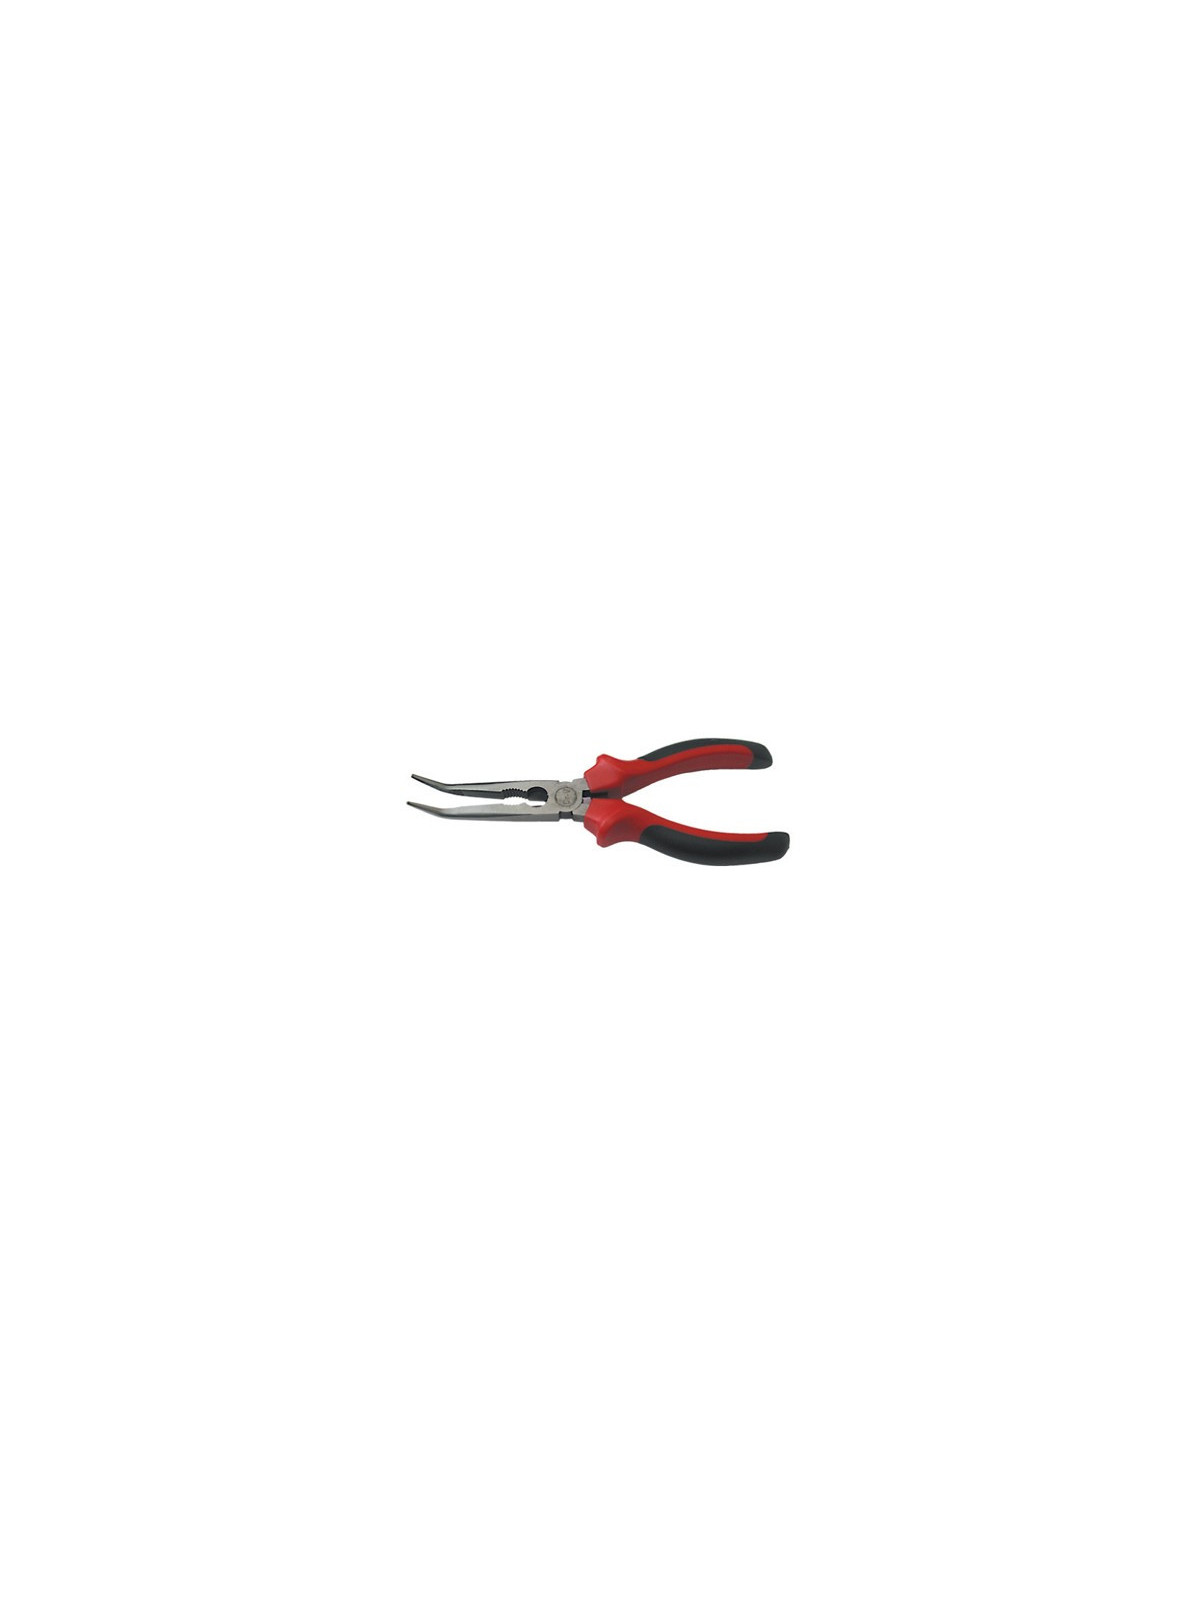 Snip nose plier curved jaws 45° OUTILAC